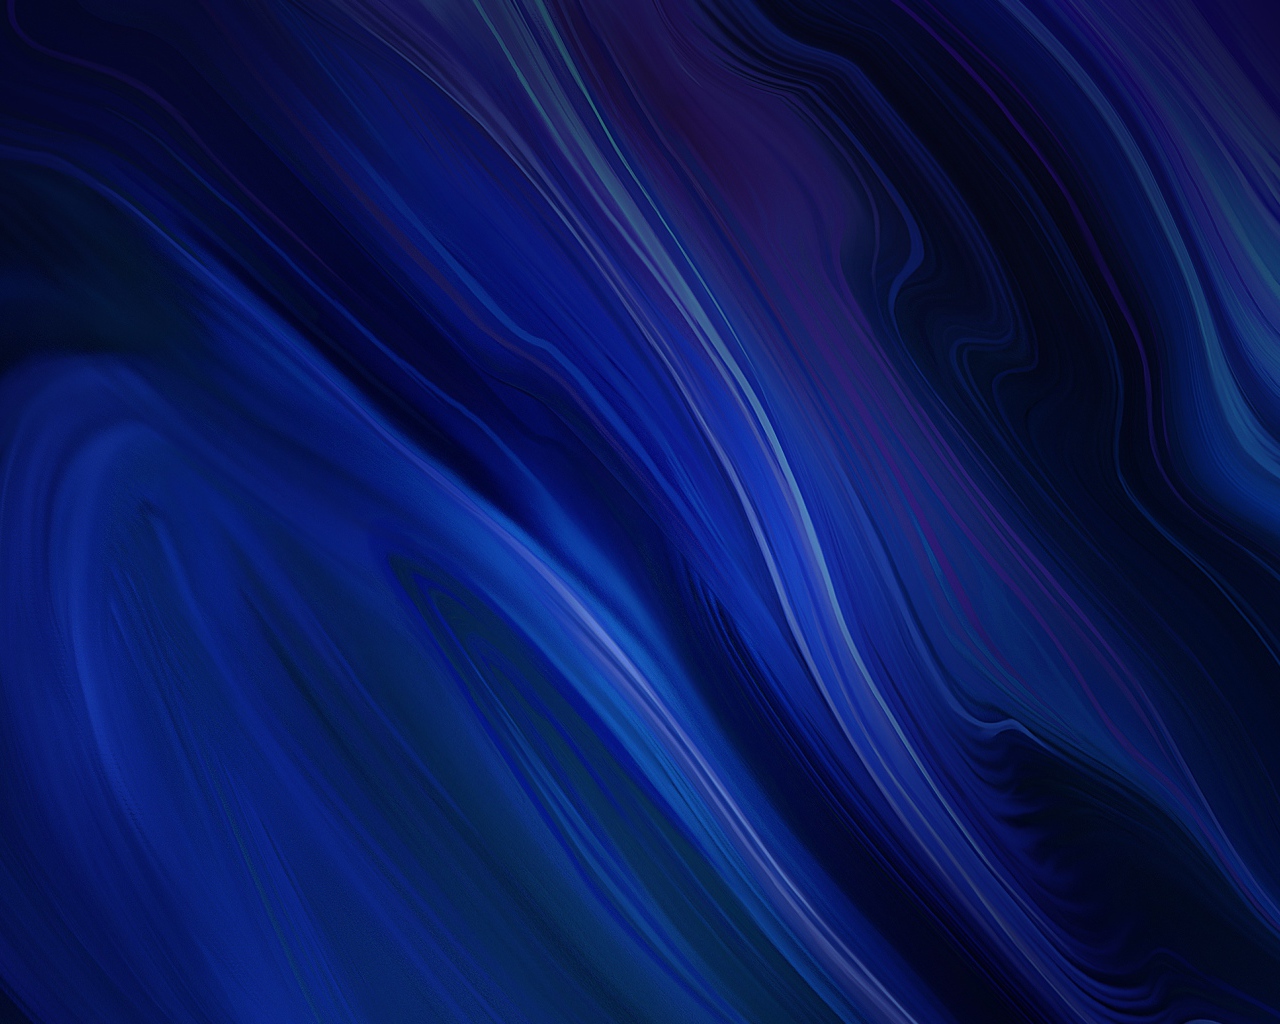 Blurred blue with blue background Desktop wallpapers 1280x1024